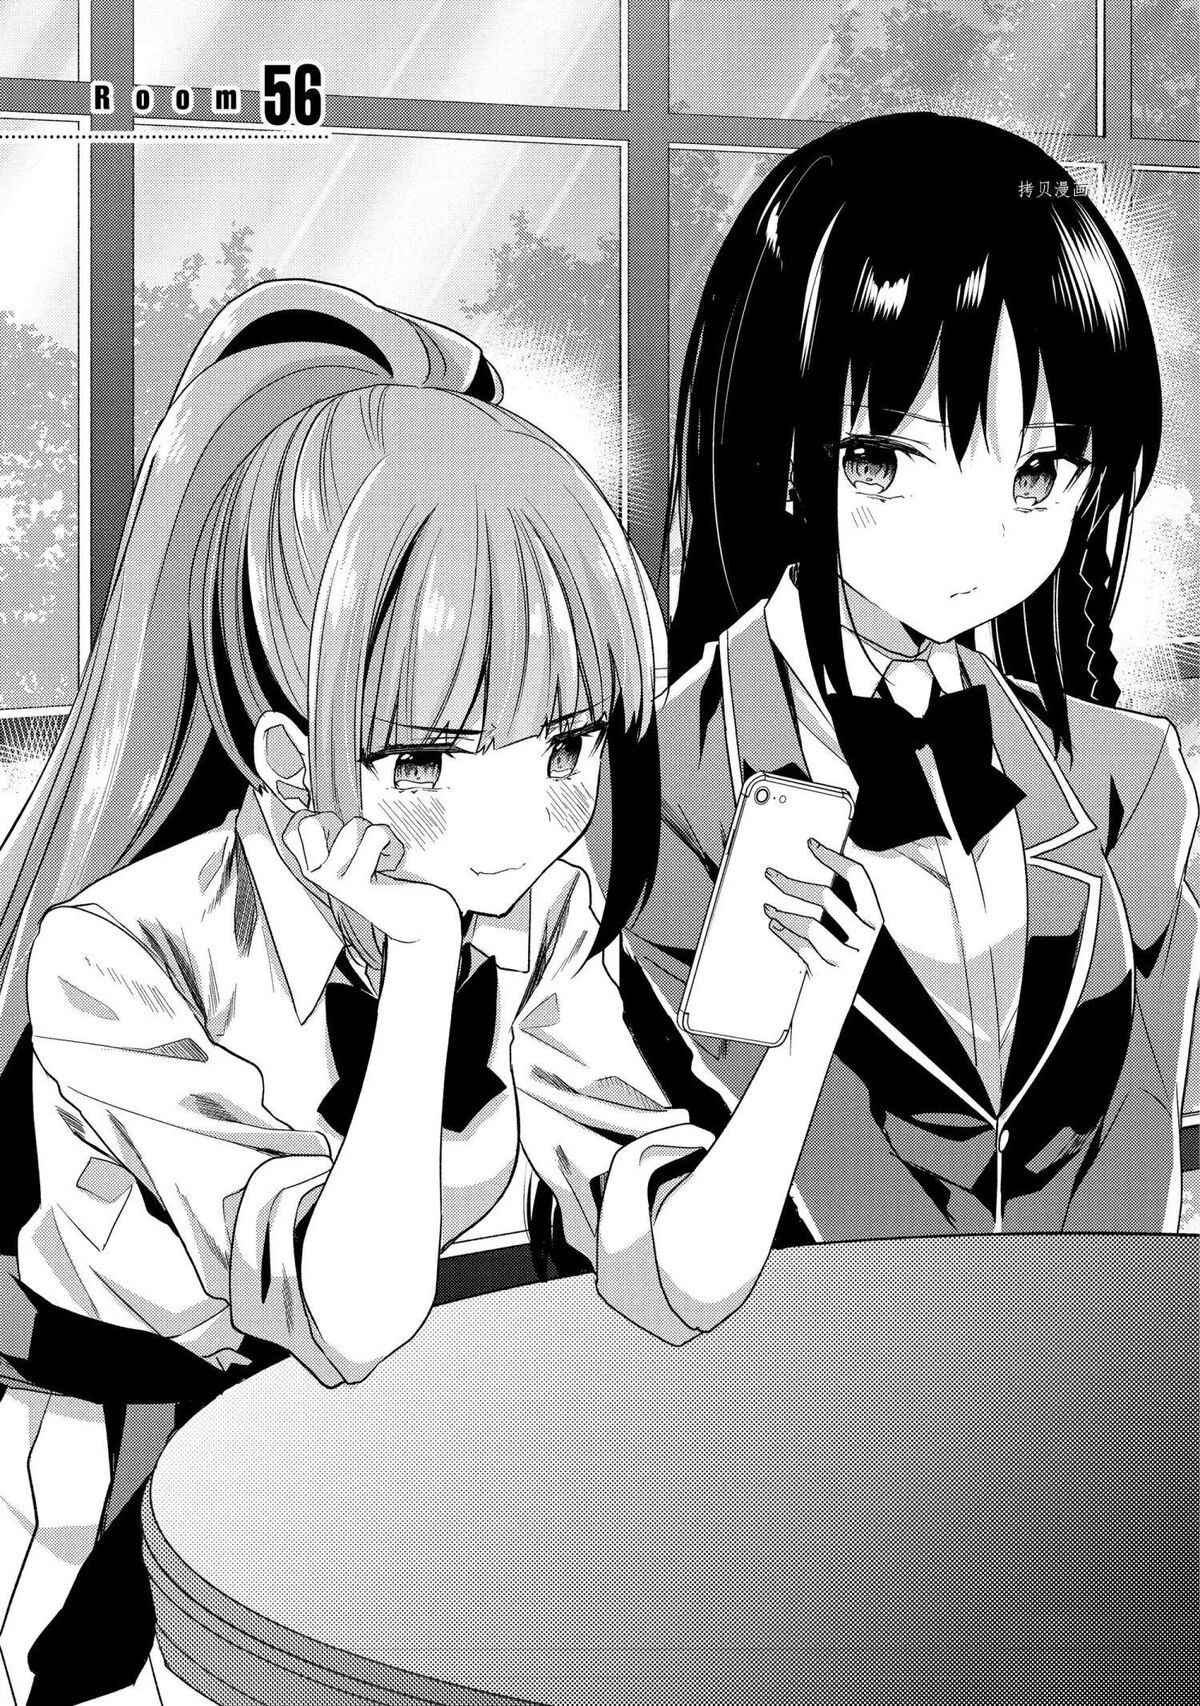 Classroom of the Elite, Chapter 56 - Classroom of the Elite Manga Online